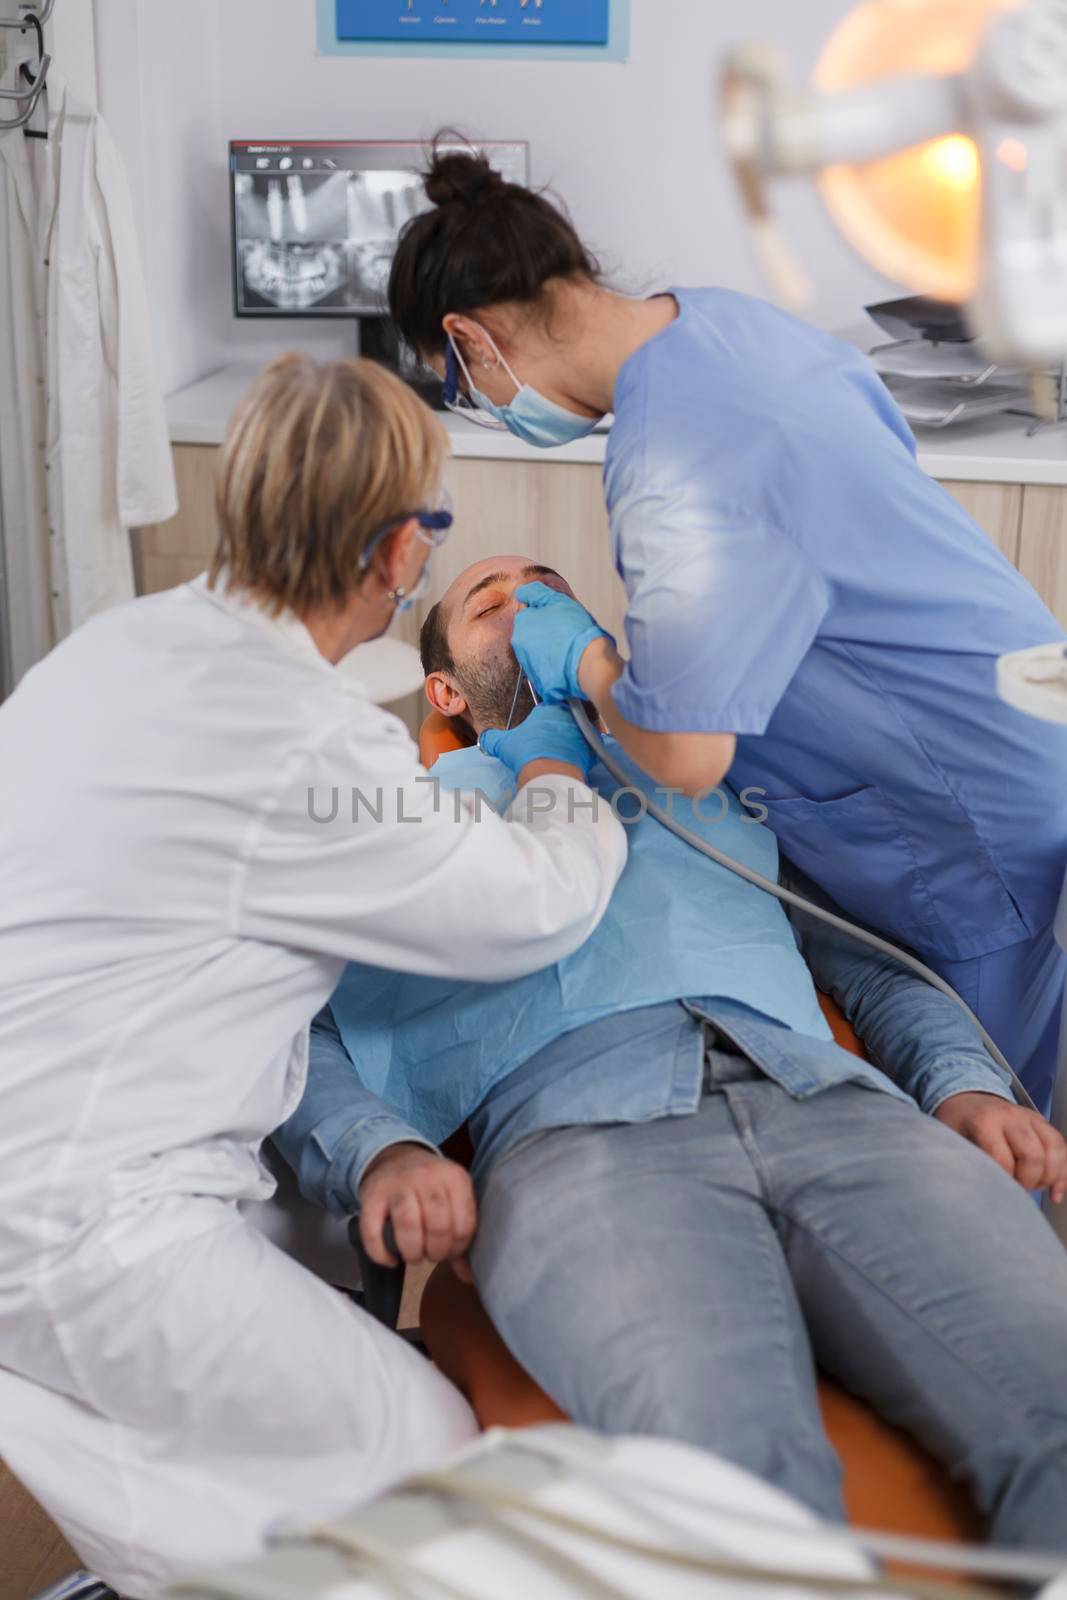 Specialist dentist team with face mask examining patient mouth during medical surgery in stomatological office room. Senior woman doctor using professional dentistry tools for cavity procedure